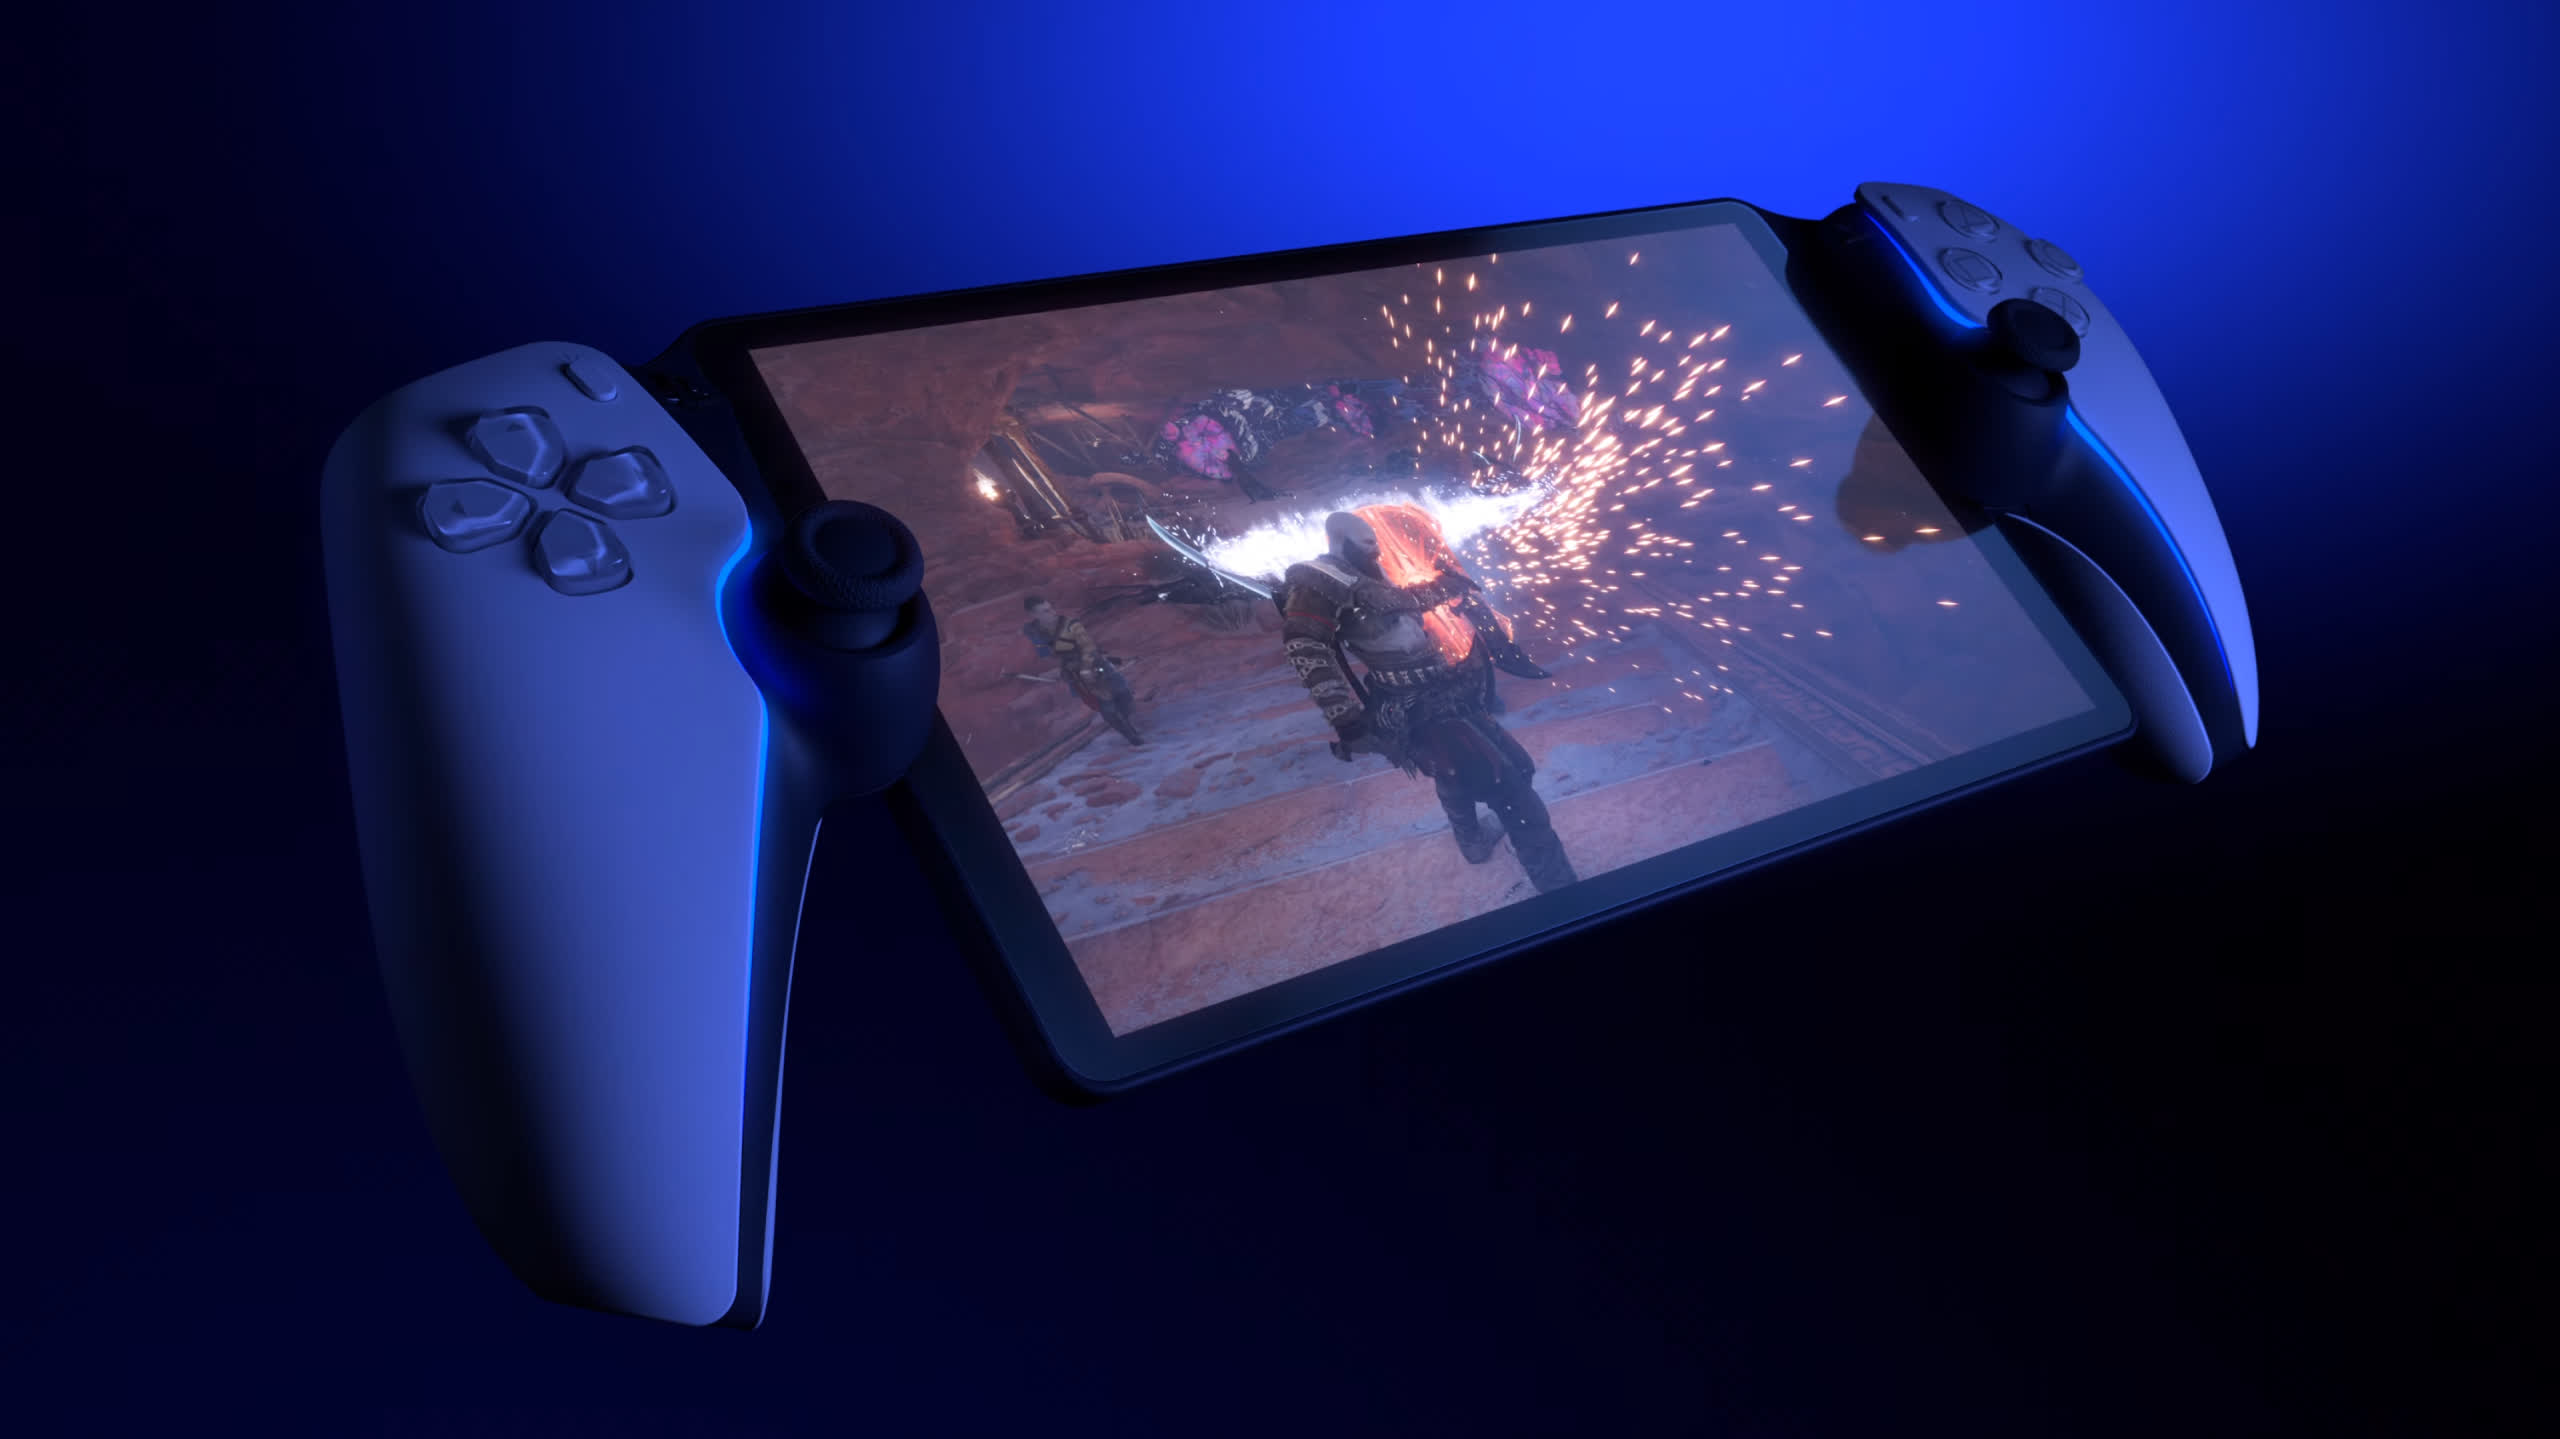 Sony reveals "Project Q" handheld designed for streaming PS5 games over Wi-Fi